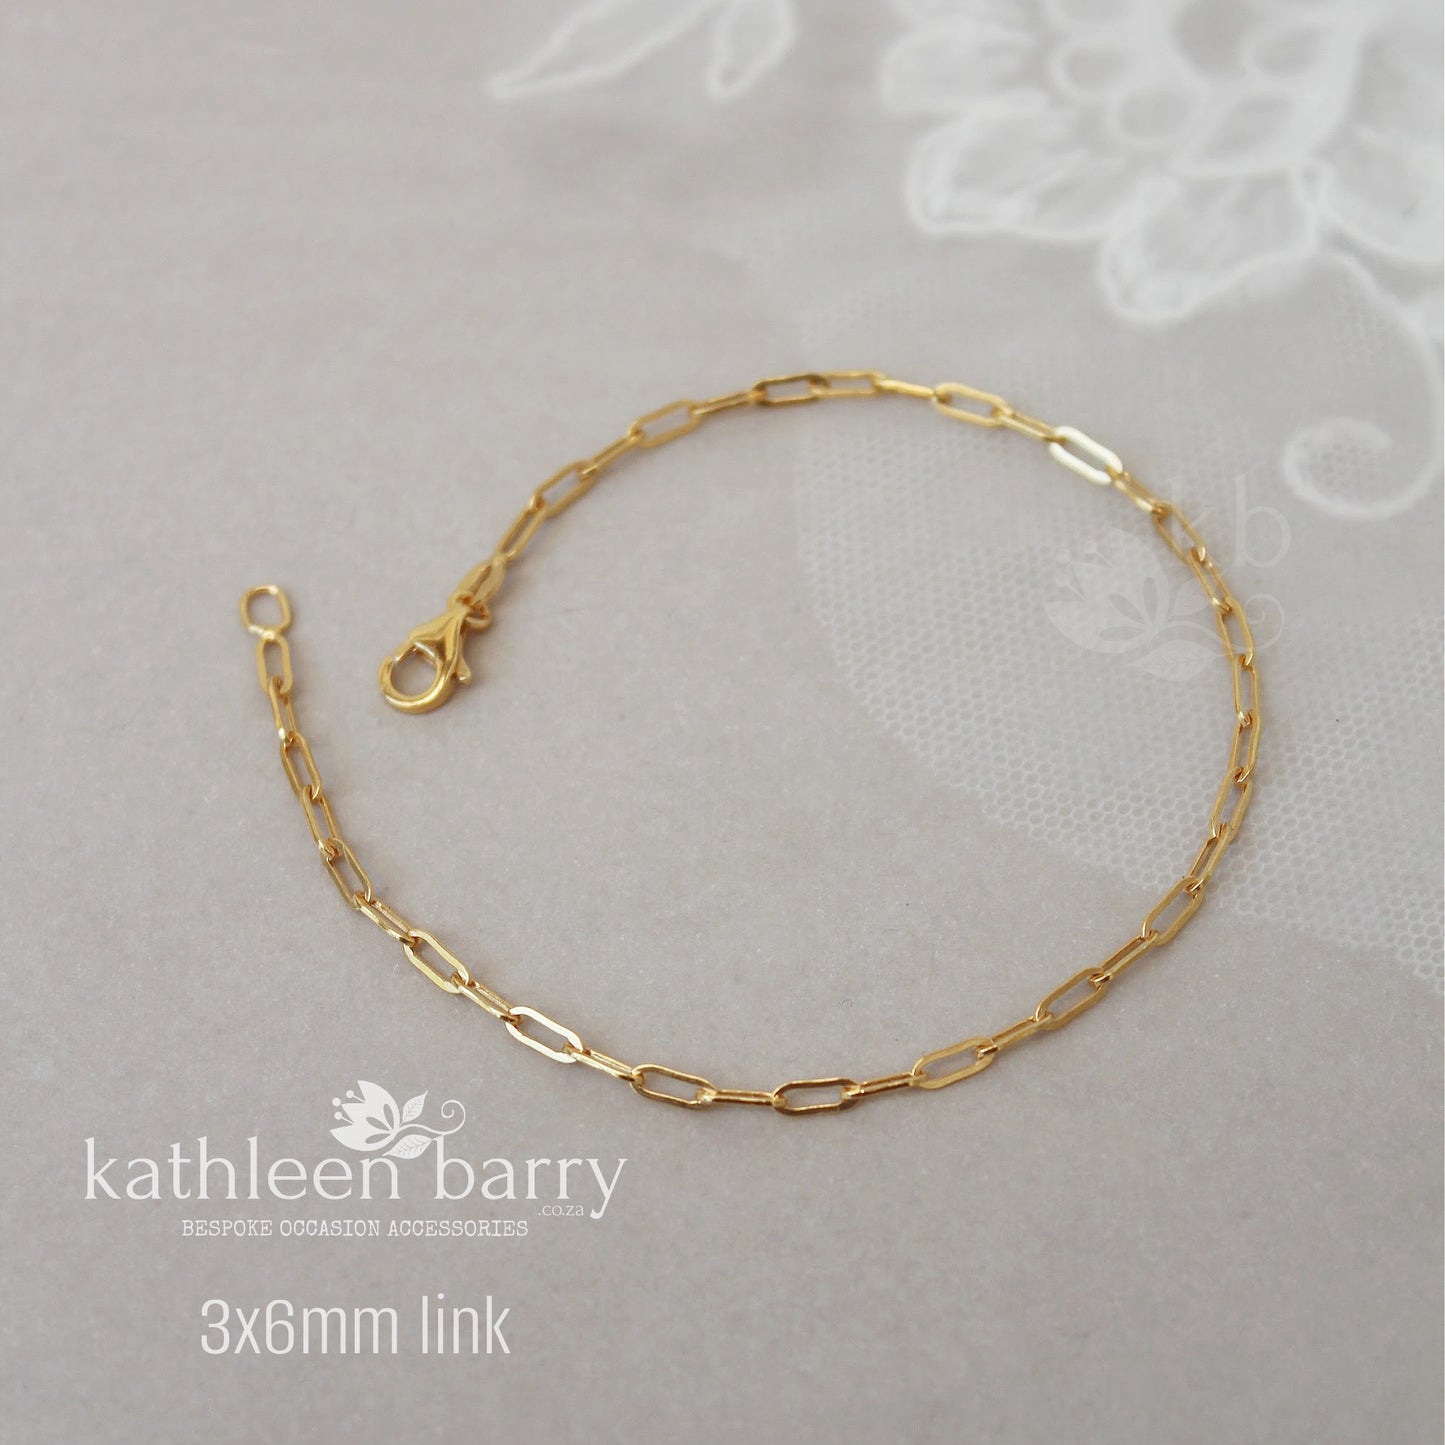 Paperclip chain link bracelet 2 link size options - Sterling silver, Gold or rose gold